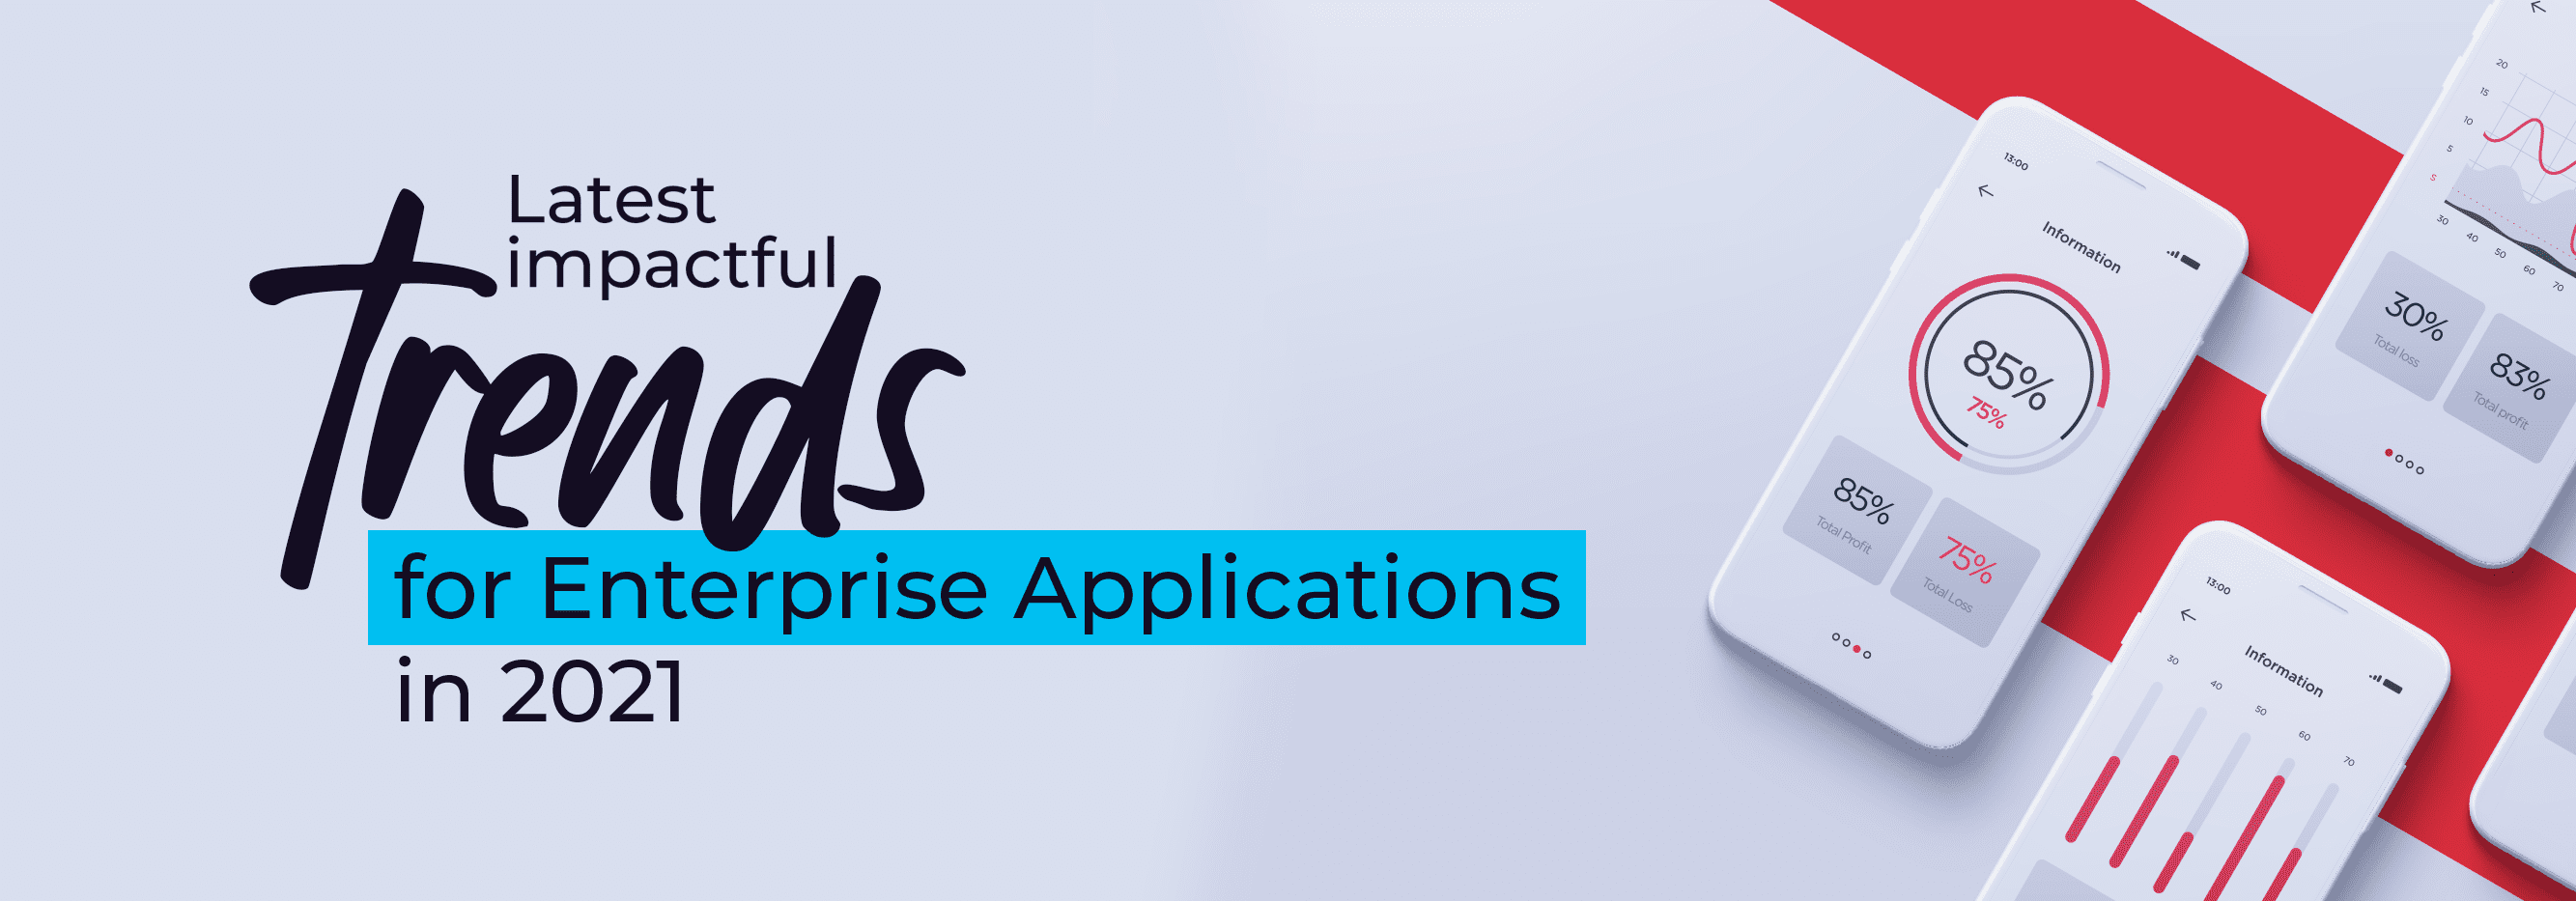 Latest impactful trends for enterprise applications in 2021_banner